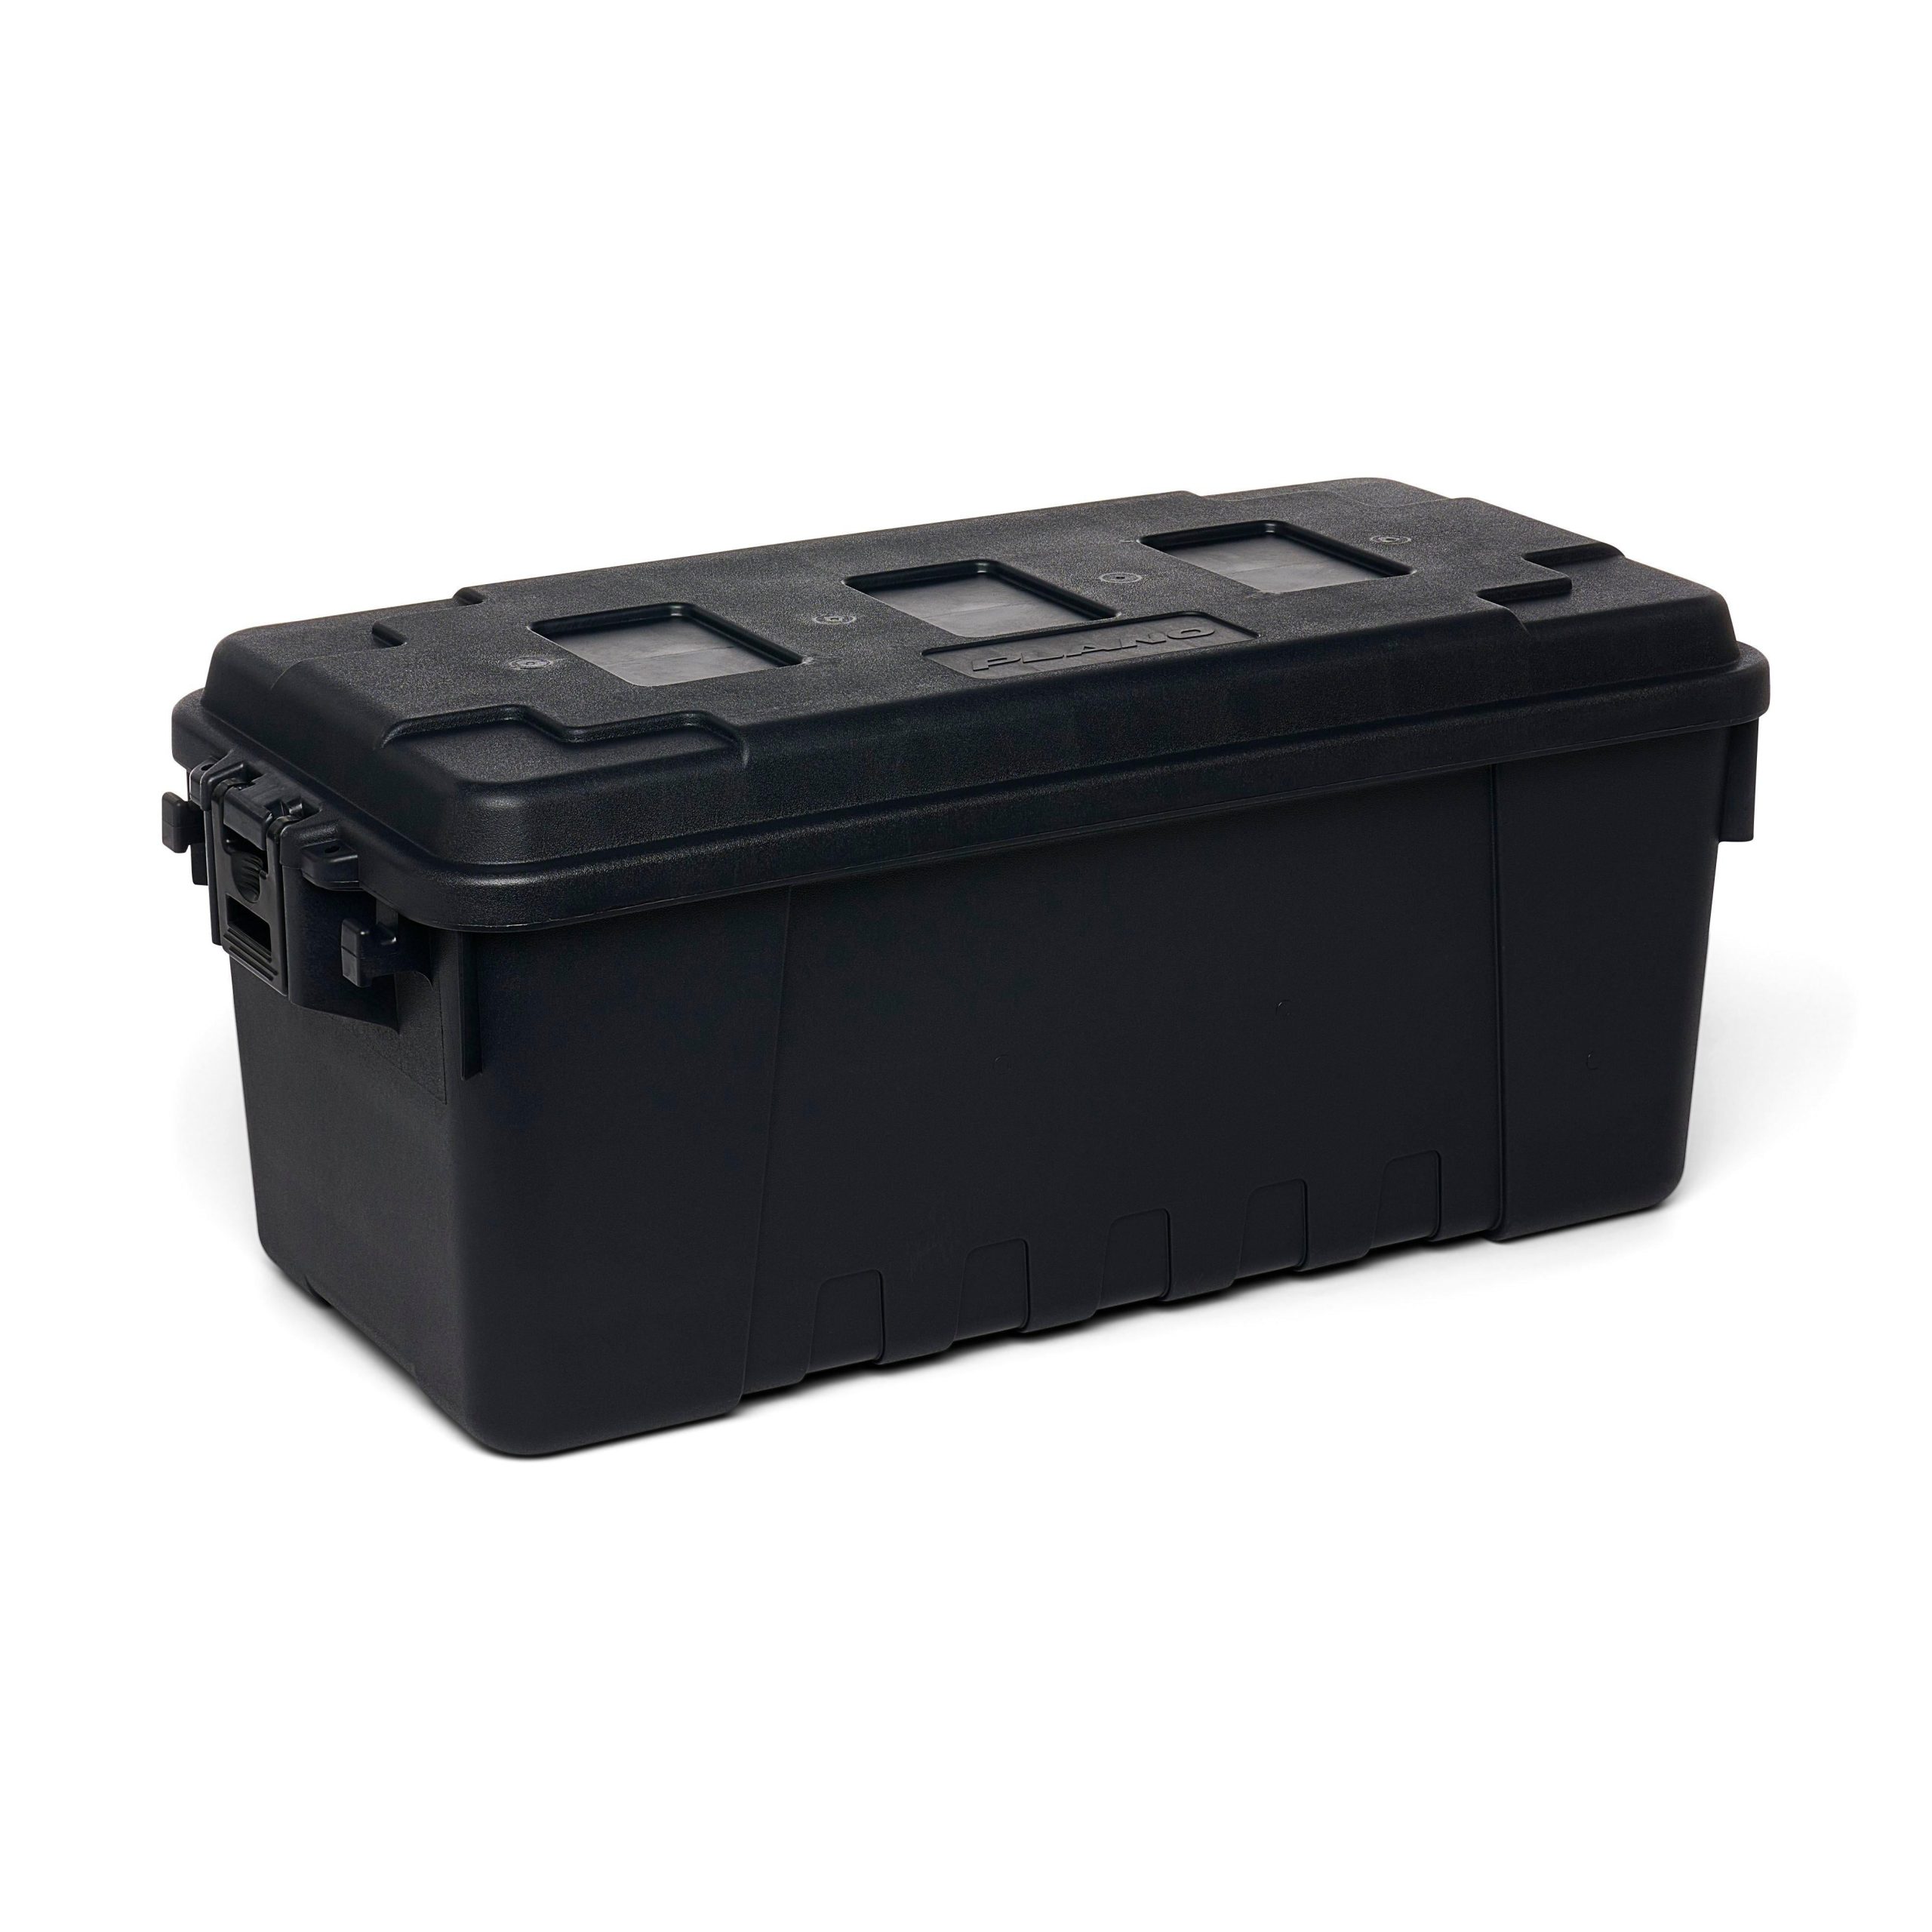 Lockable storage box: Discover the Versatility of it